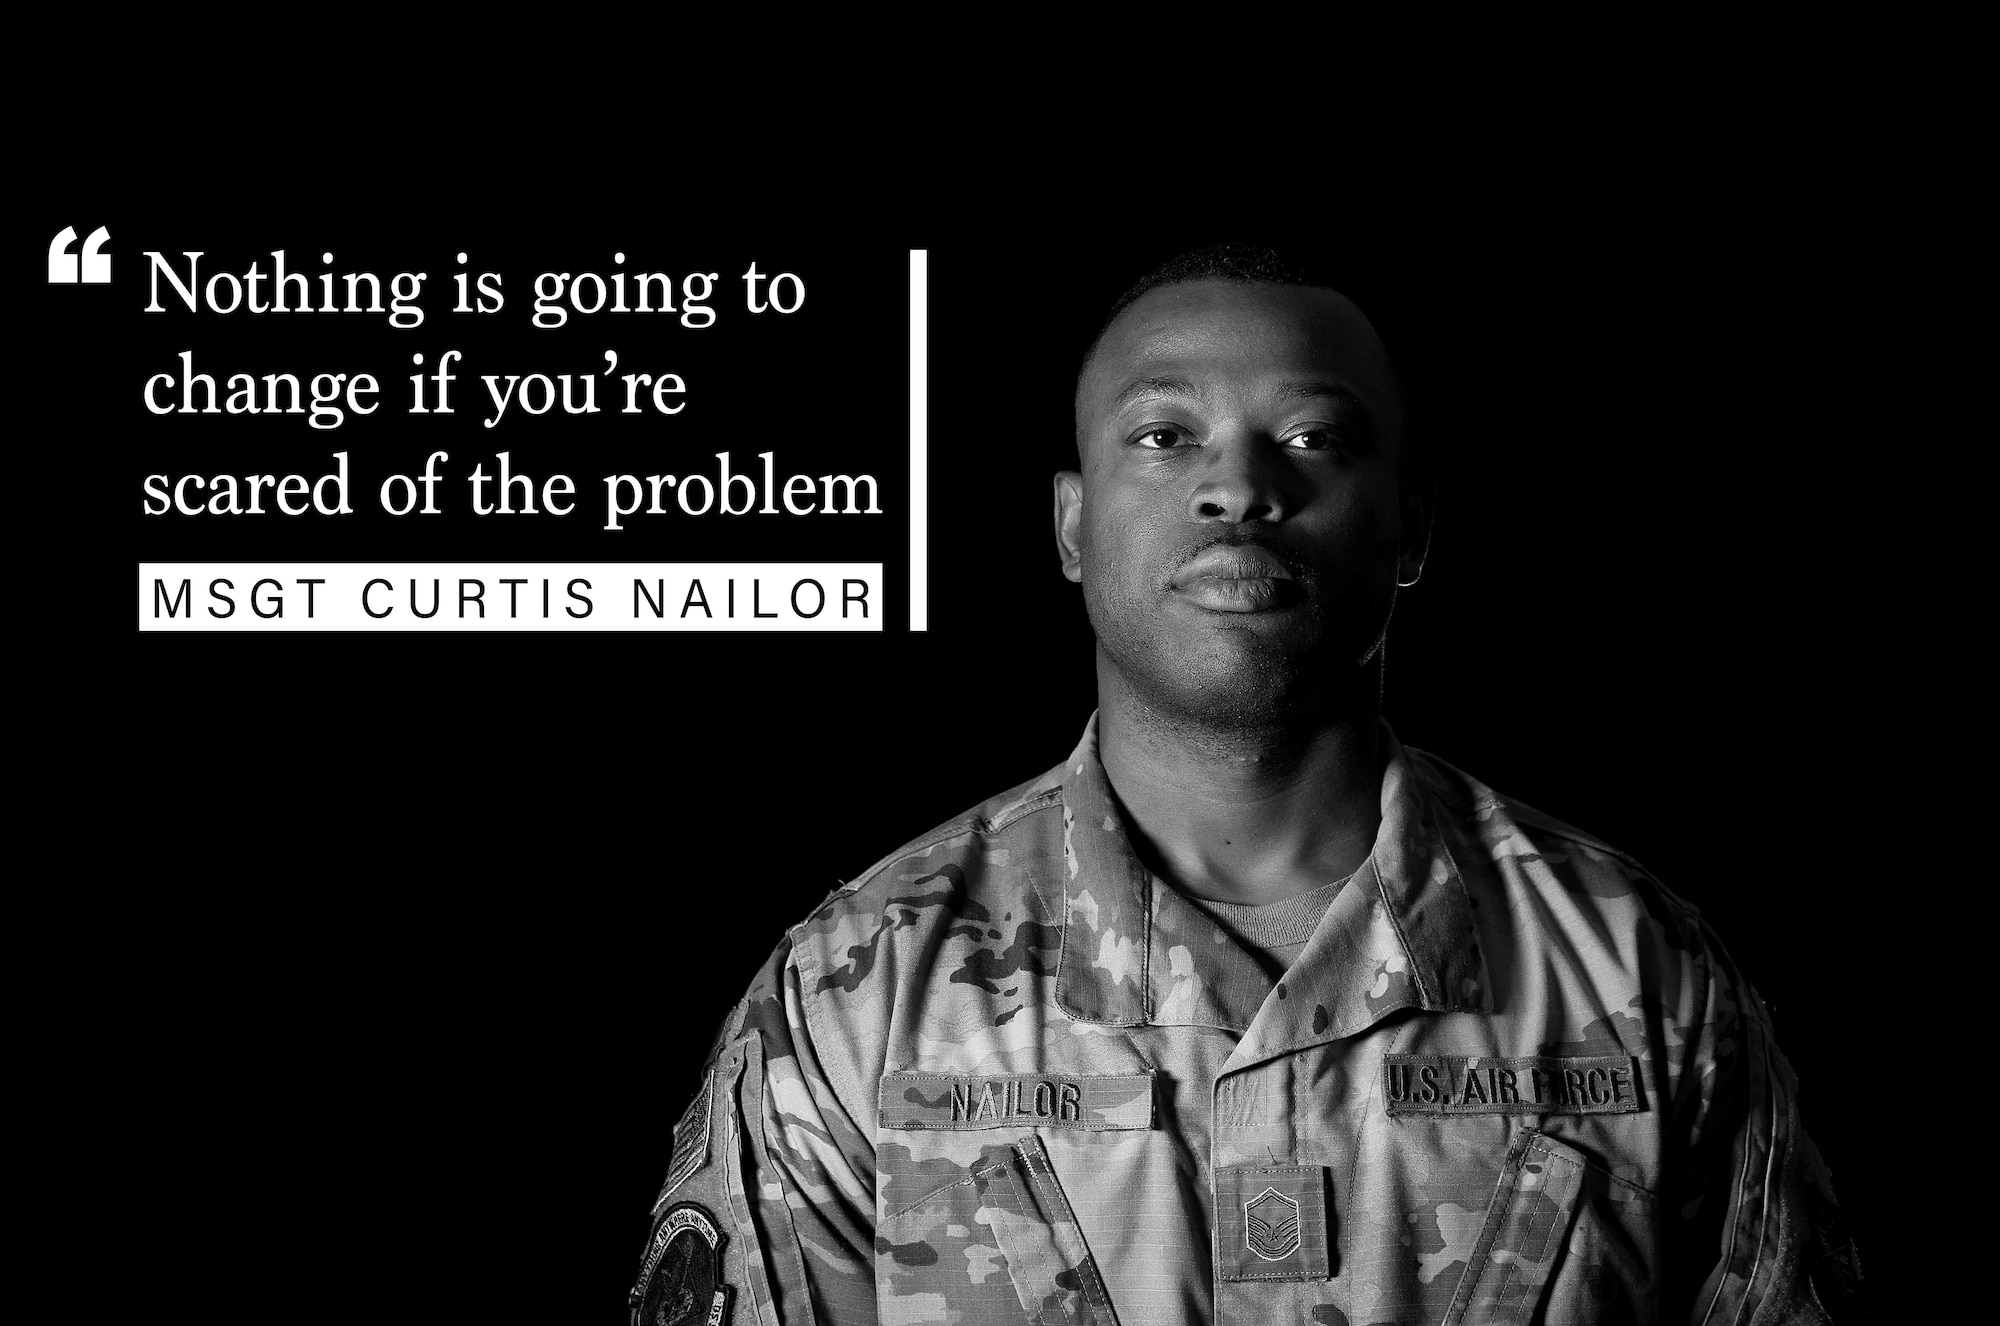 Master Sgt. Curtis Nailor, 22nd Logistics Readiness Squadron customer support section chief, reflects on unity and the importance of having difficult conversations about racism June 29, 2020, at McConnell Air Force Base, Kansas. As racial disparities continue to plague the nation, Nailor asks that Americans come together and take action to combat racism. (U.S. Air Force illustration by Senior Airman Michaela R. Slanchik)